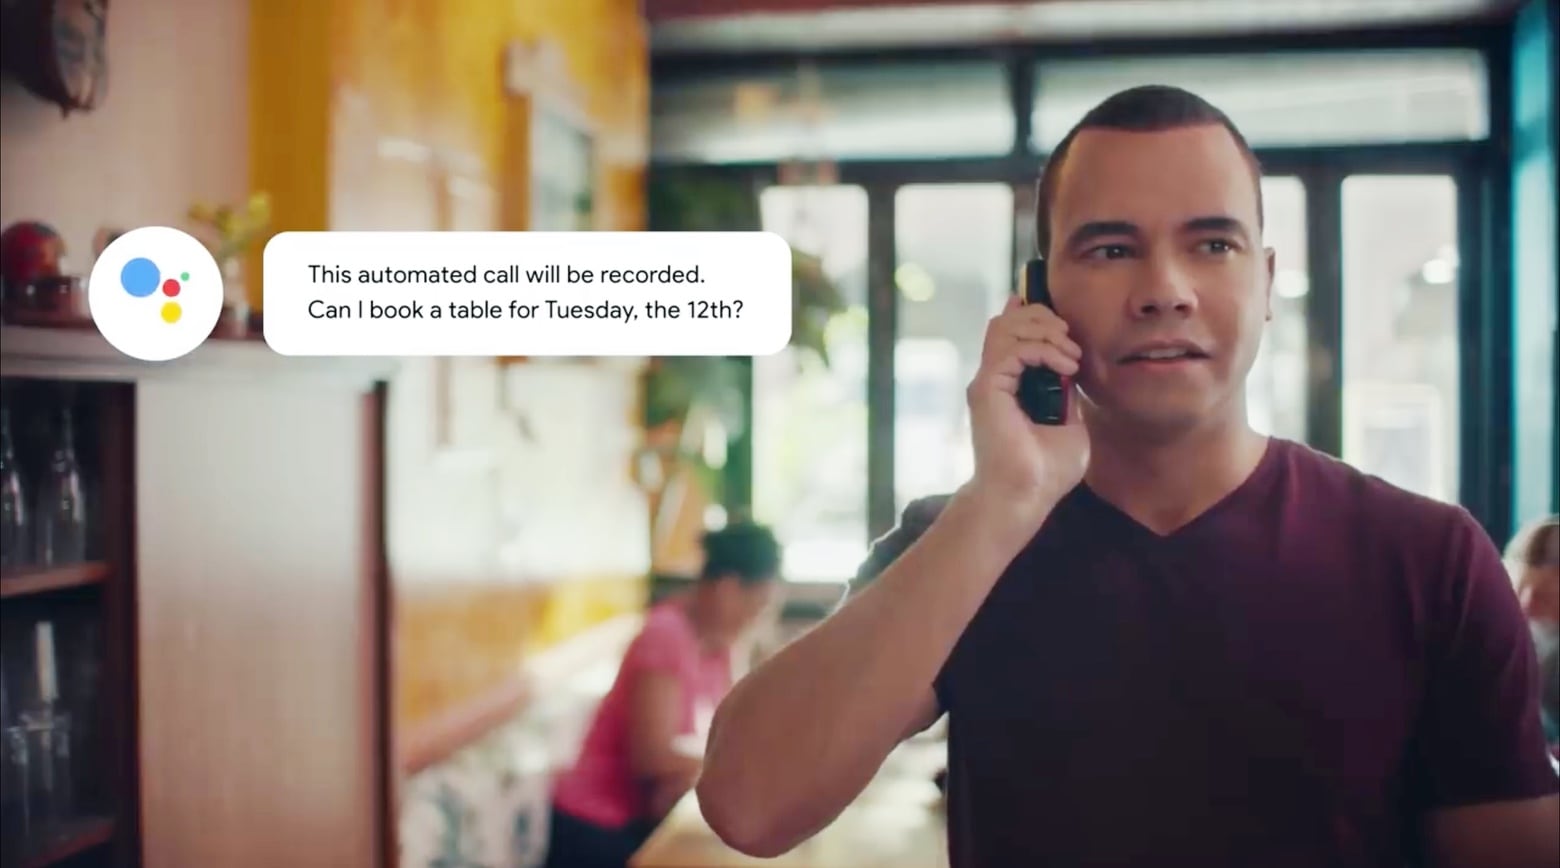 Google Duplex uses an AI to make very realistic phone calls on your behalf.